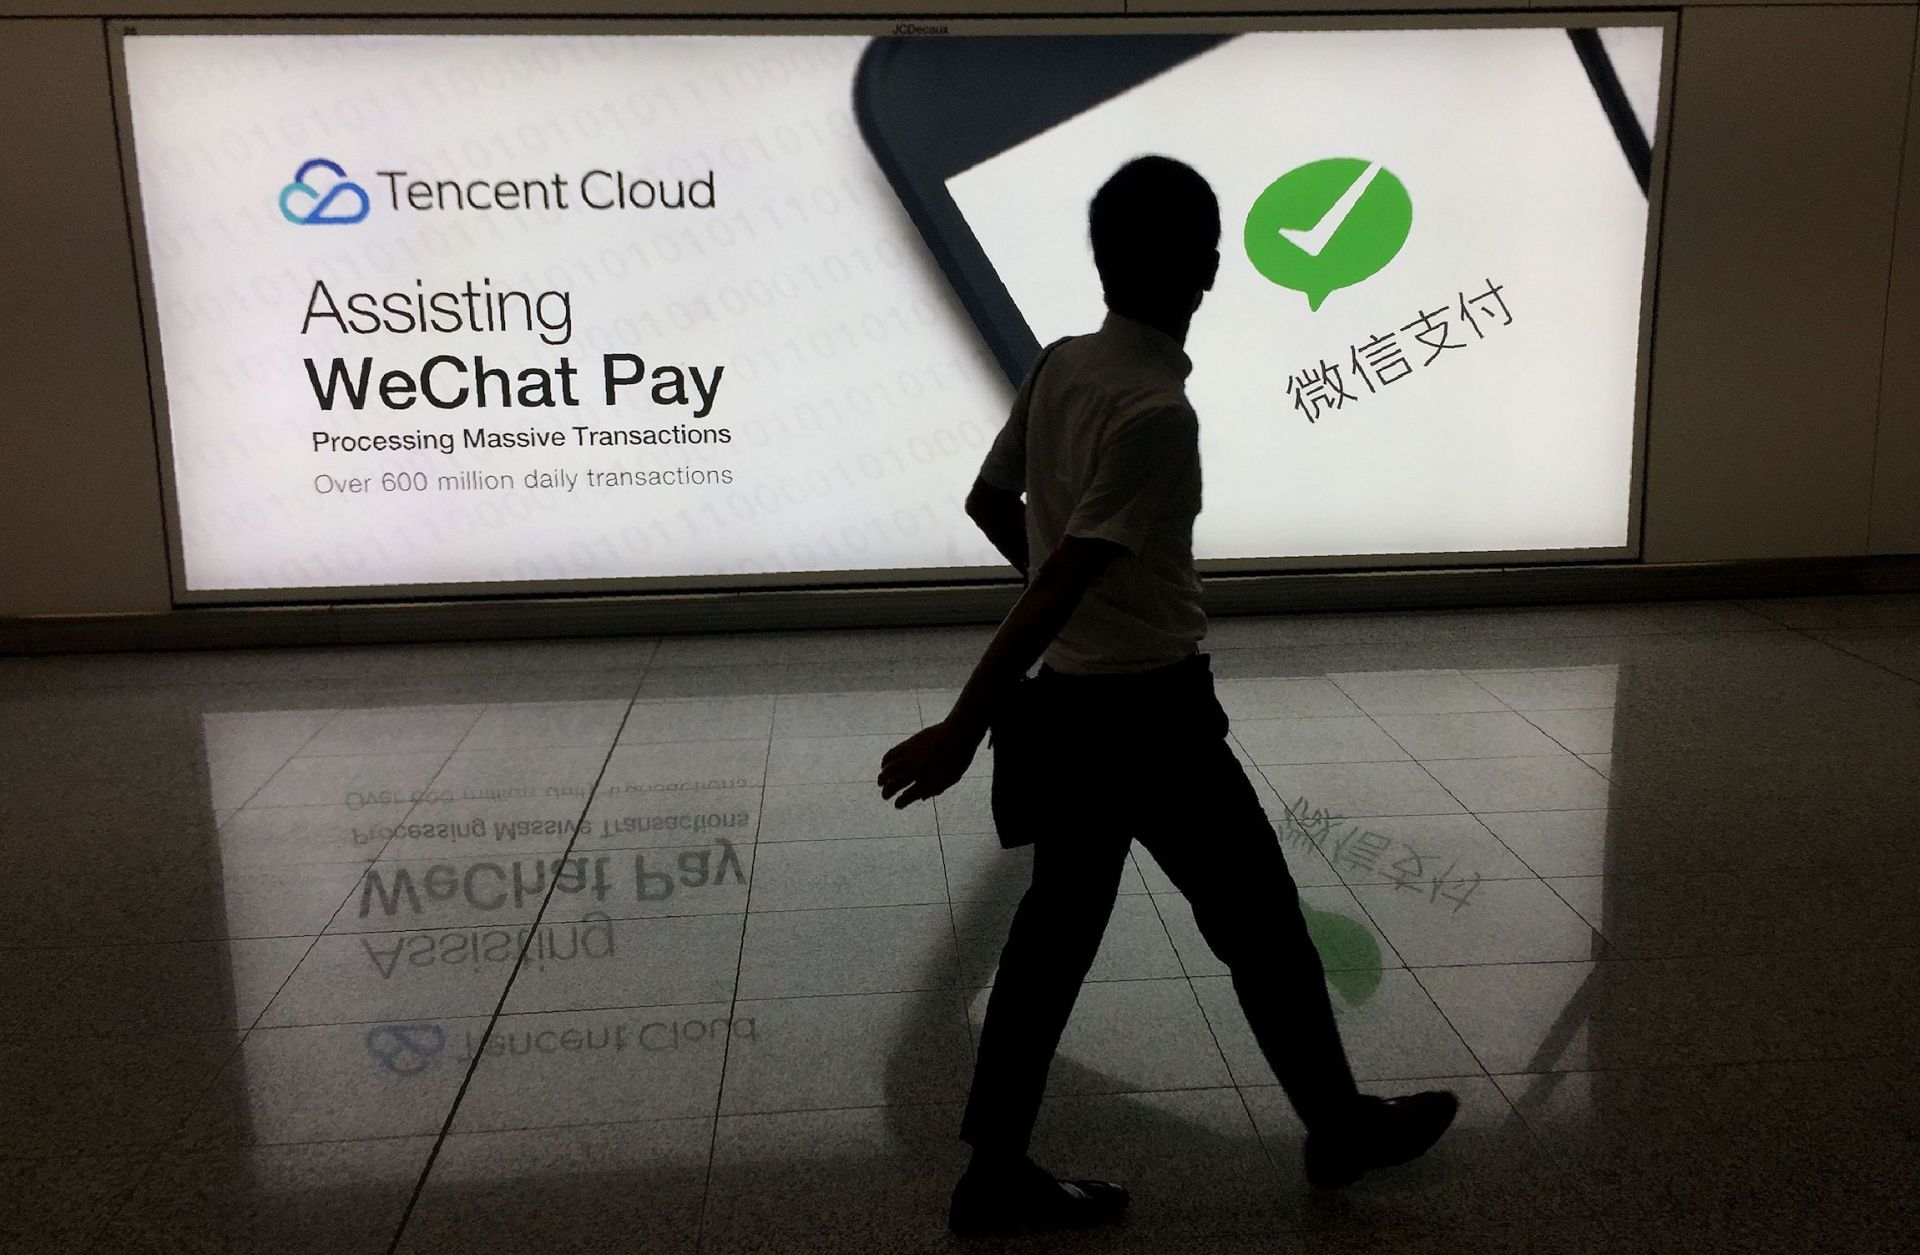 In this August 2017 photo, a man walks past an ad in Hong Kong's international airport for the social media platform WeChat, which is owned by China's Tencent.